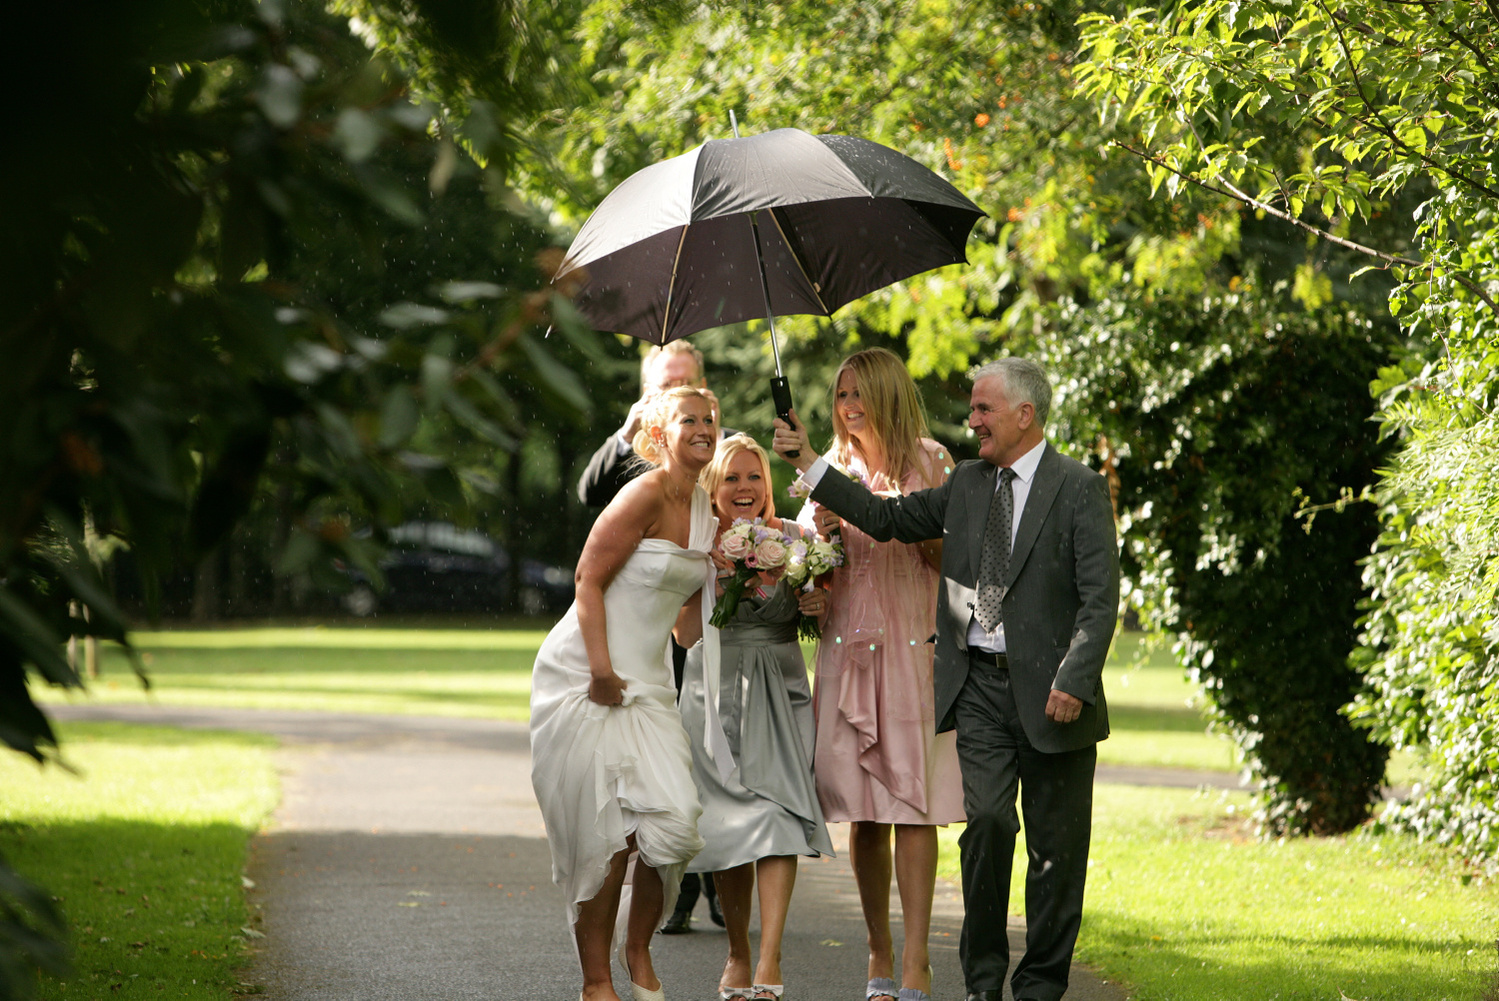 Wedding day photos Bride and bridesmaids with Father of the bride huddled under an umbrella in the park fun reportage documentary style wedding photography